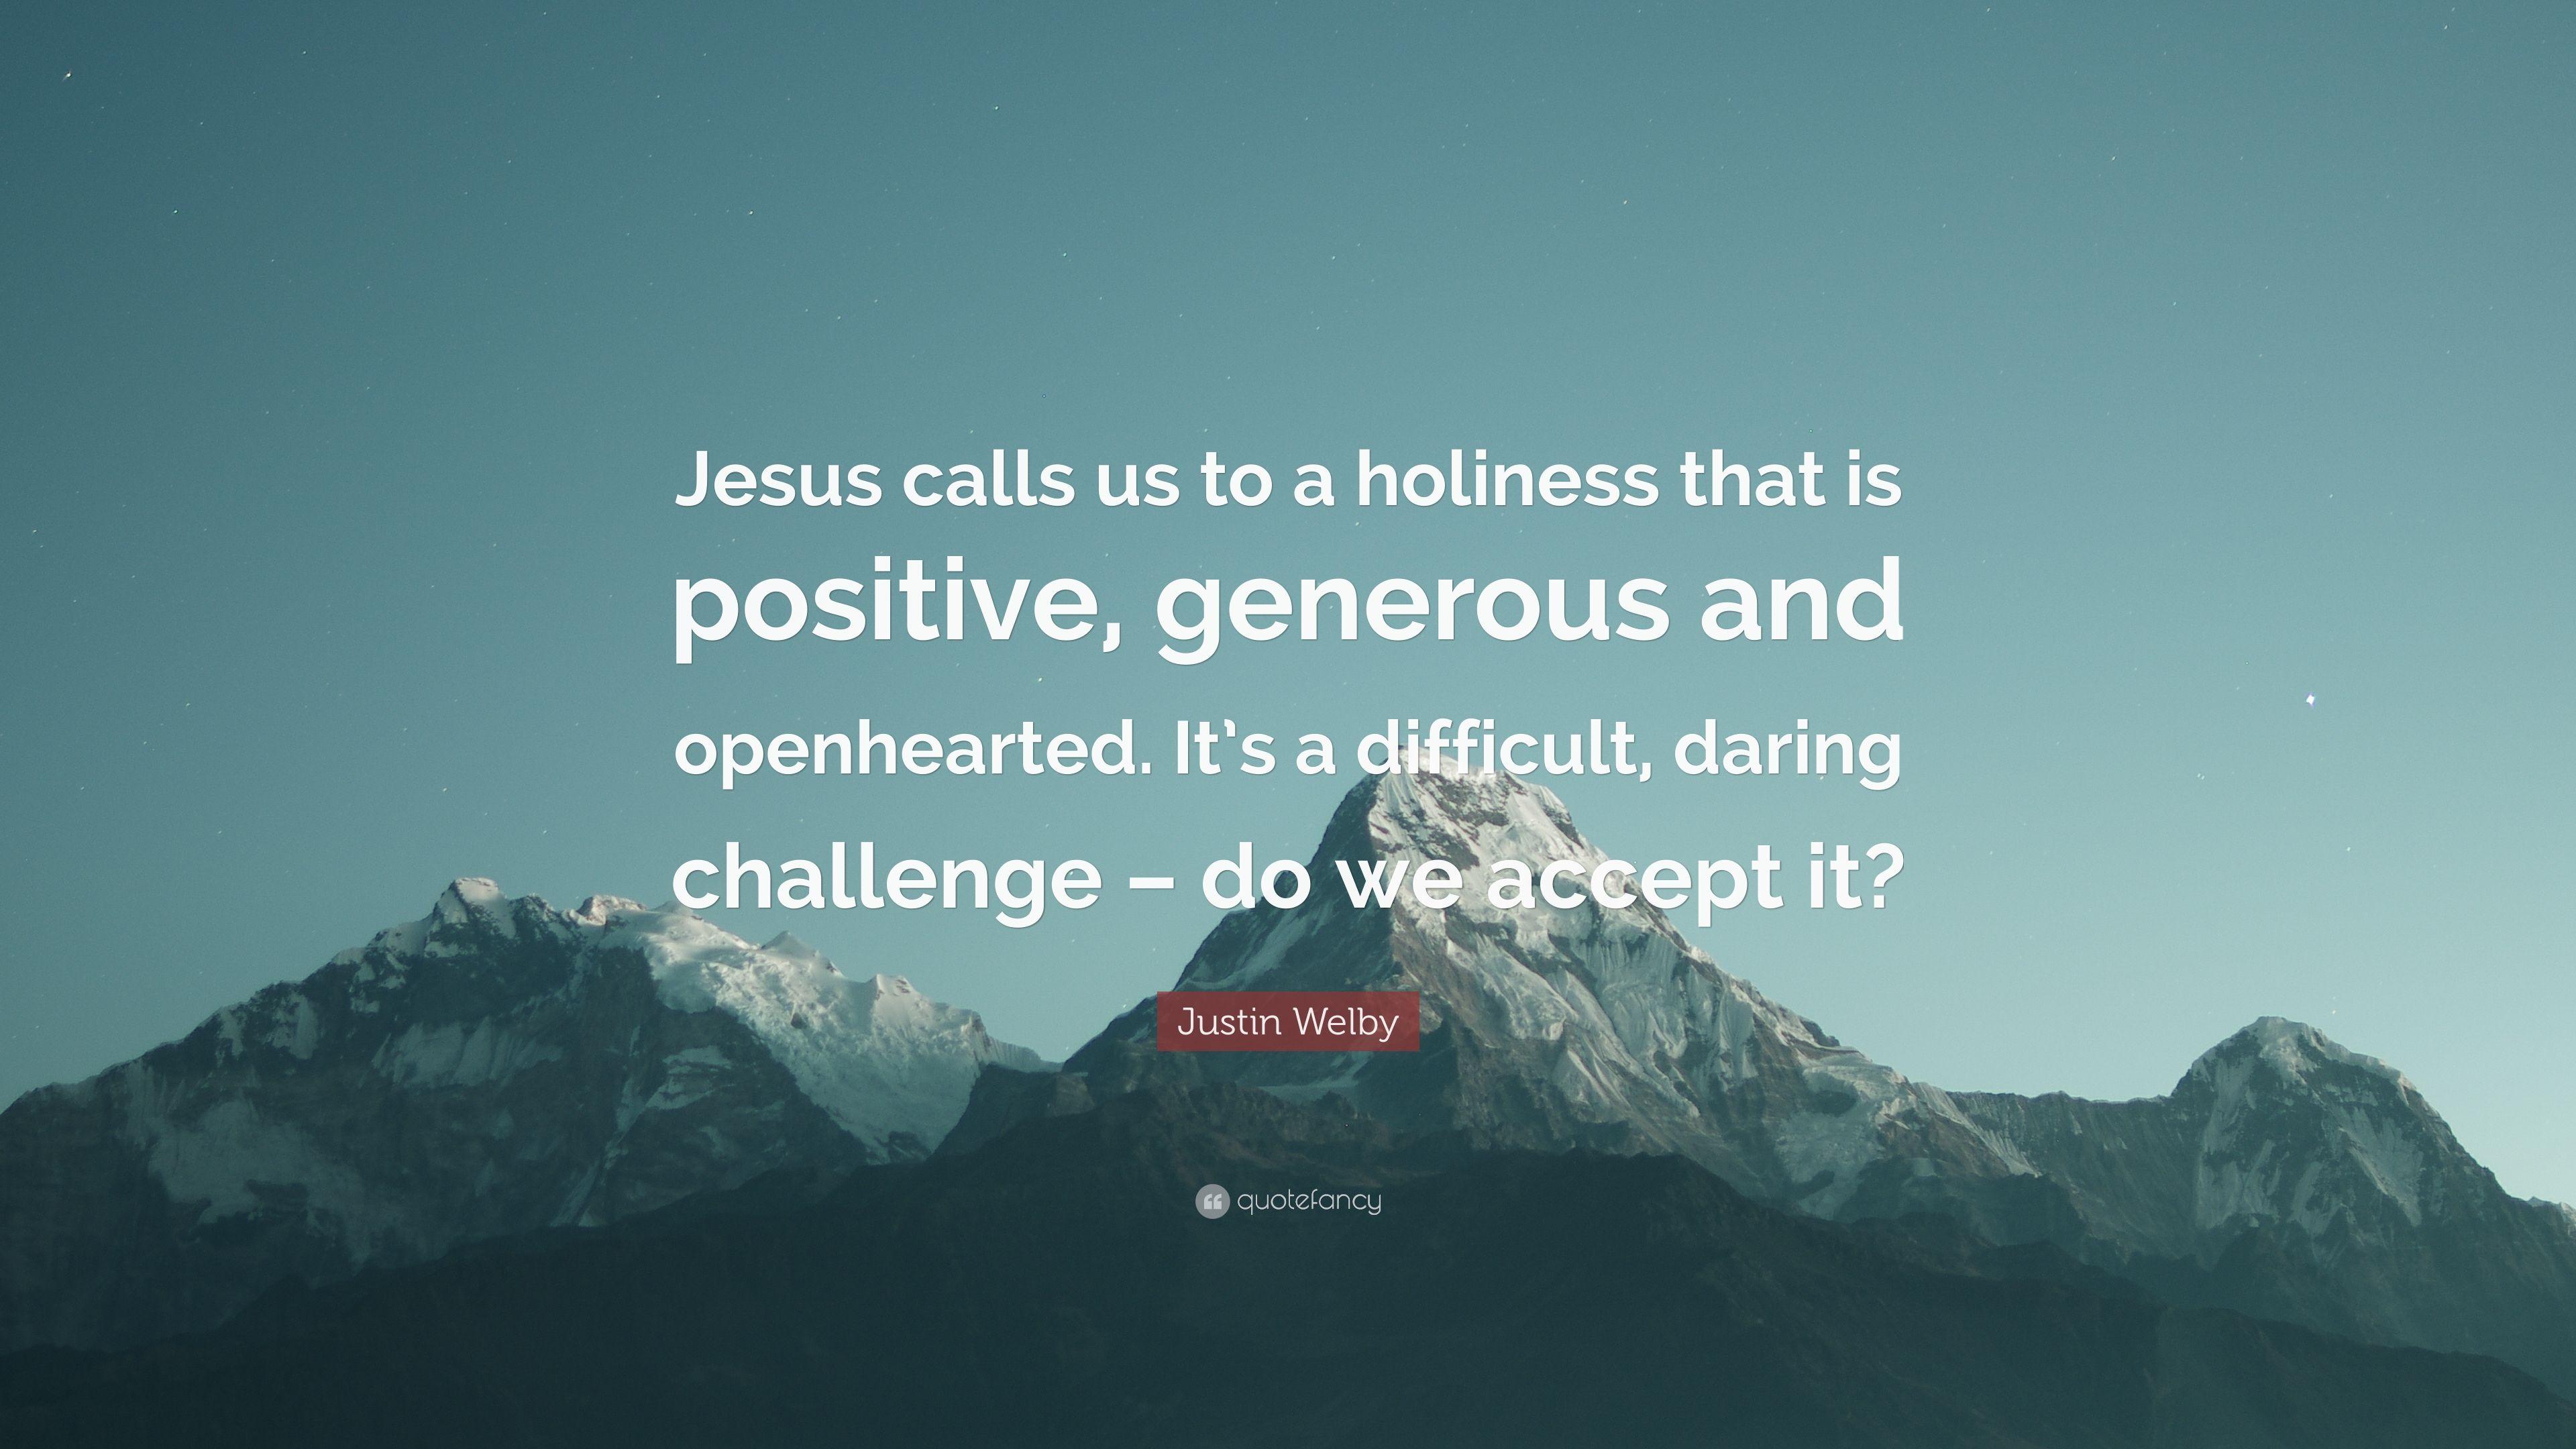 Justin Welby Quote: “Jesus calls us to a holiness that is positive